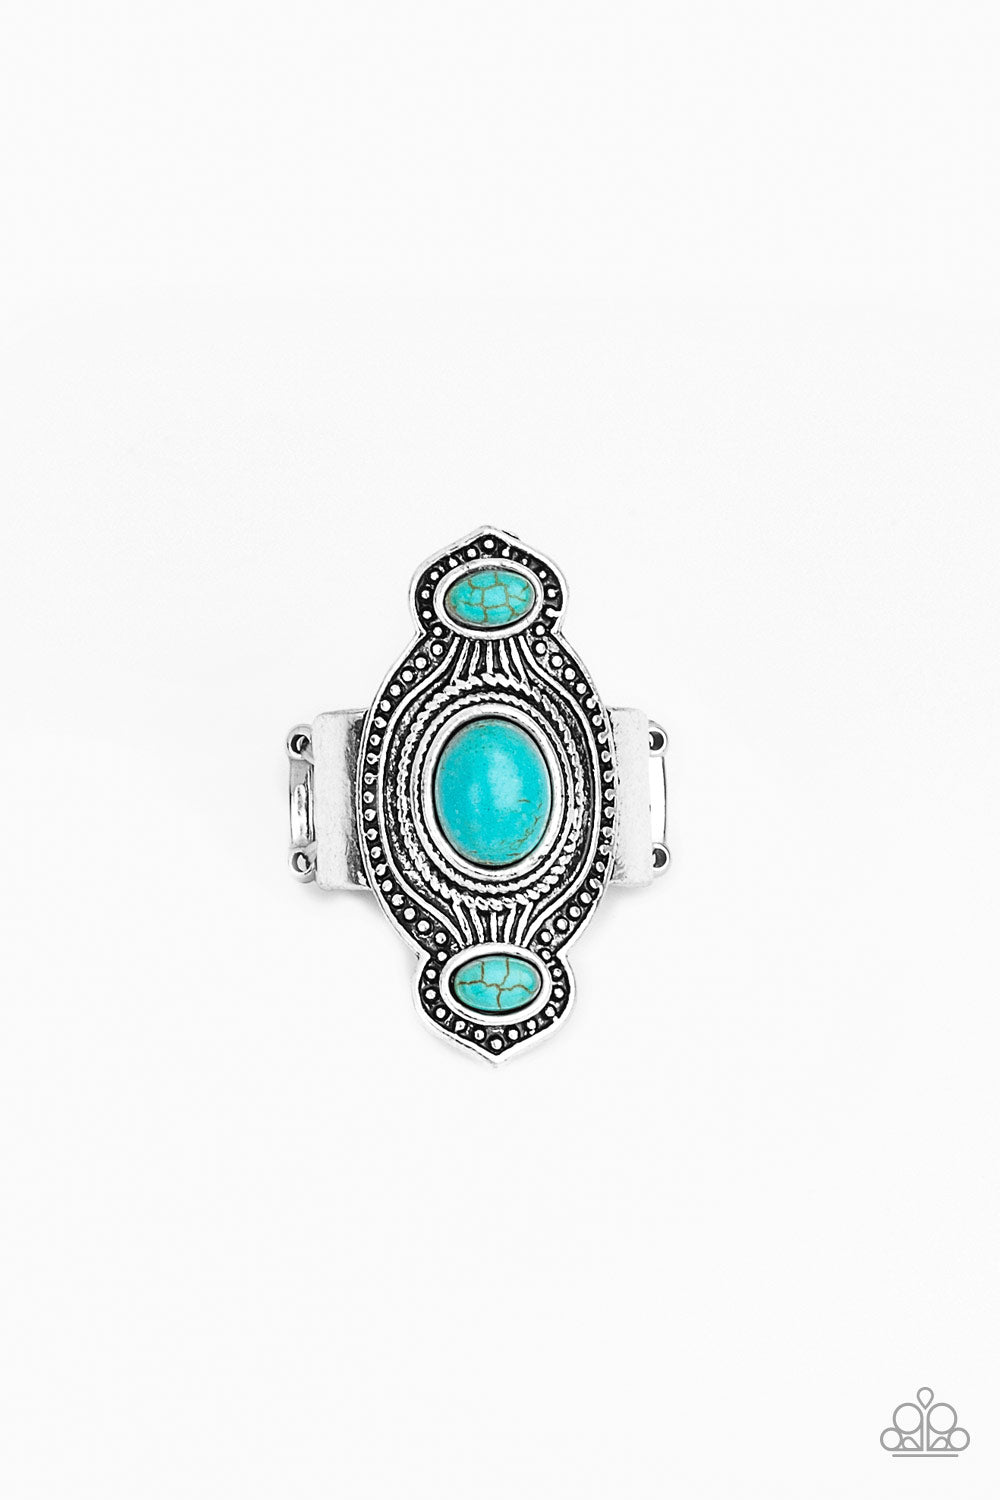 &lt;P&gt;Three refreshing turquoise stones are pressed into an abstract silver frame radiating with texture and studded details for a seasonal look. Features a stretchy band for a flexible fit. &lt;/P&gt;  

&lt;P&gt; &lt;I&gt;  Sold as one individual ring.
&lt;/I&gt;&lt;/P&gt;

&lt;img src=\&quot;https://d9b54x484lq62.cloudfront.net/paparazzi/shopping/images/517_tag150x115_1.png\&quot; alt=\&quot;New Kit\&quot; align=\&quot;middle\&quot; height=\&quot;50\&quot; width=\&quot;50\&quot;/&gt;